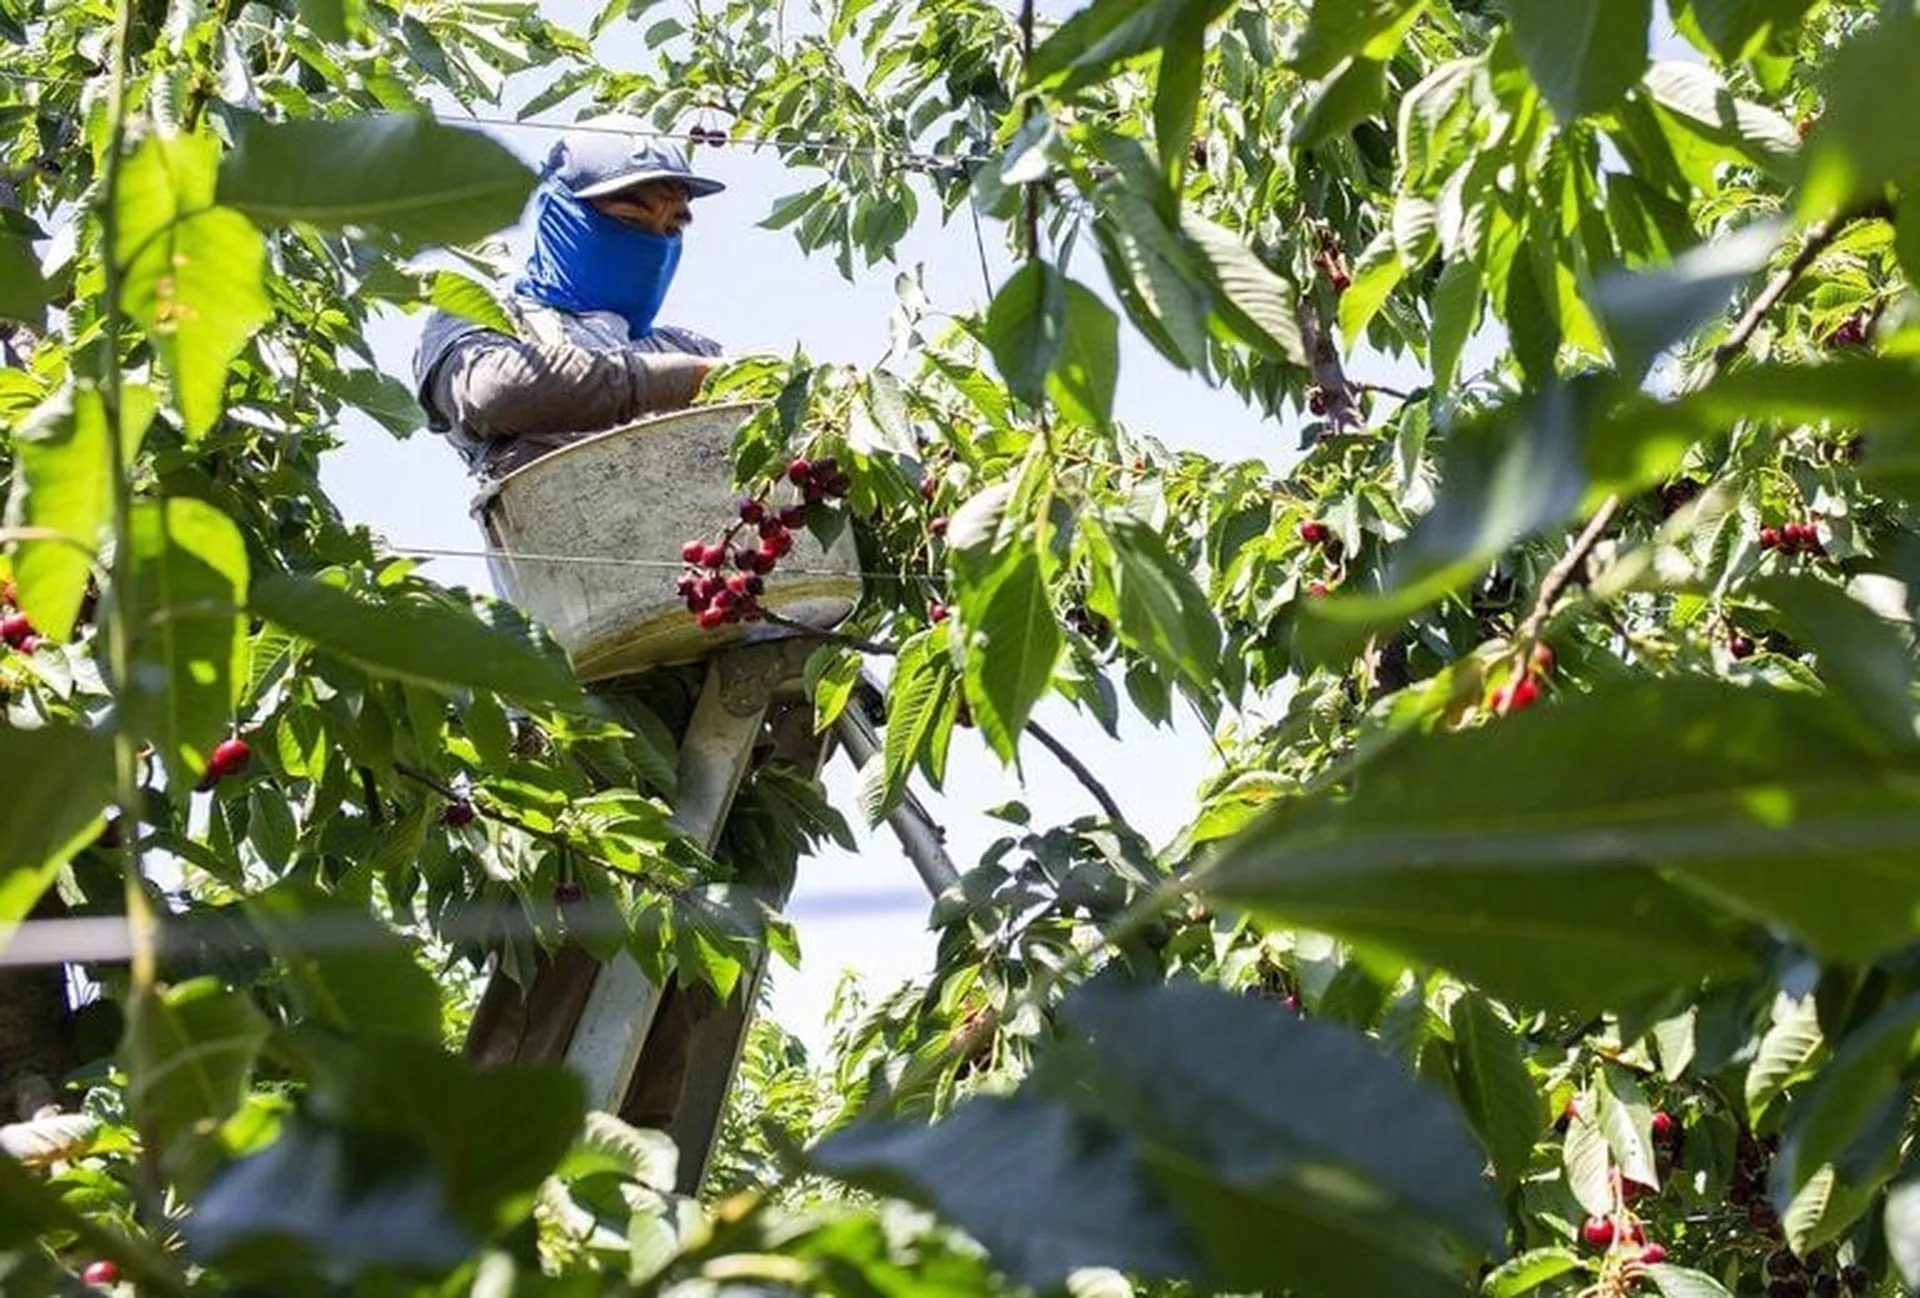 Federal aid for Washington cherry growers: state of disaster declared